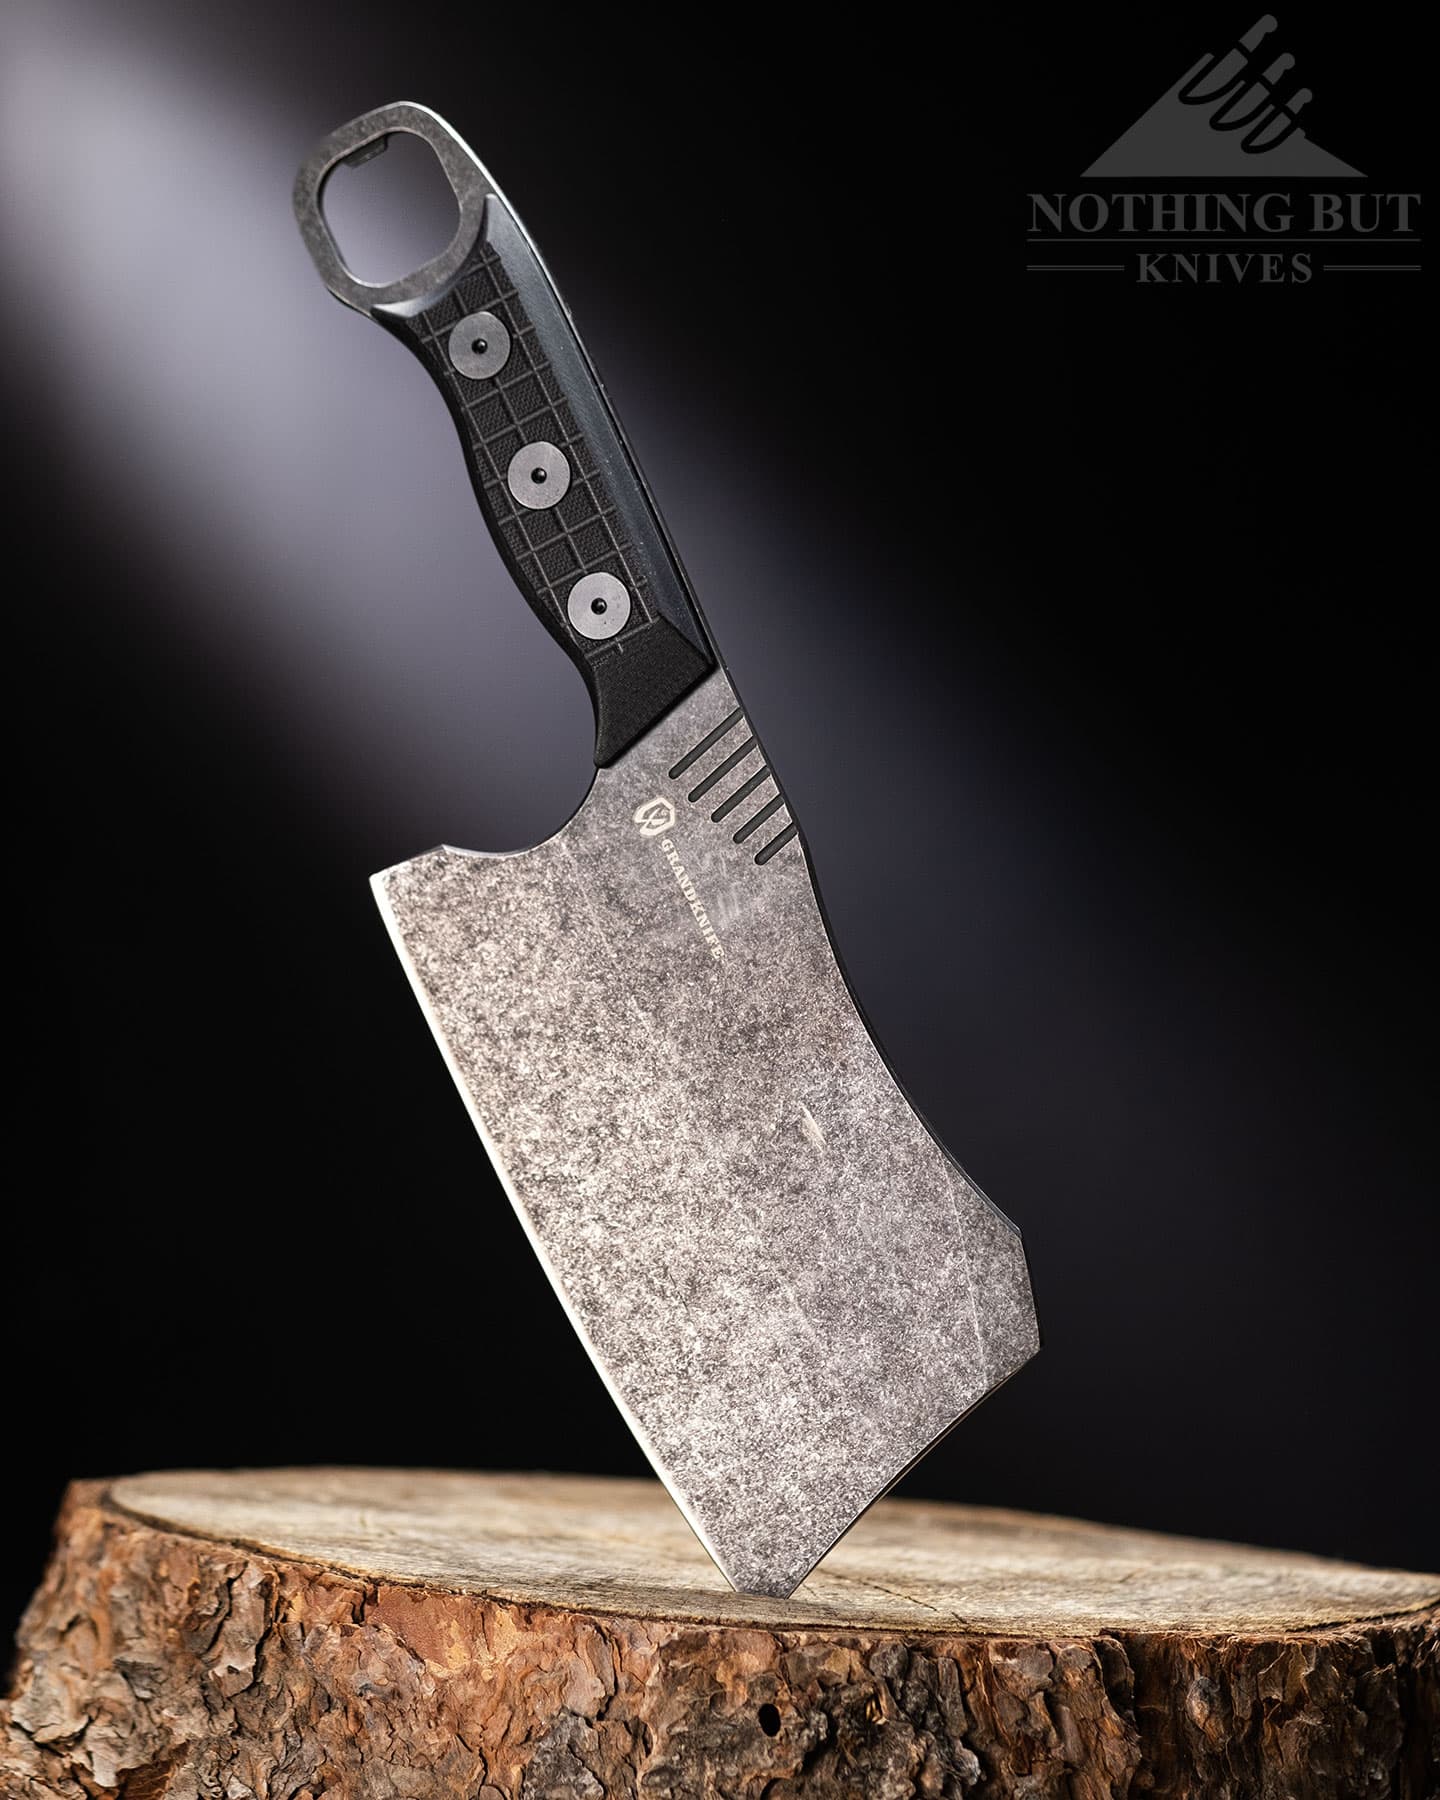 We spent a few weeks testing out the Vosteed Minibarbar camping cleaver indoors and outdoors.